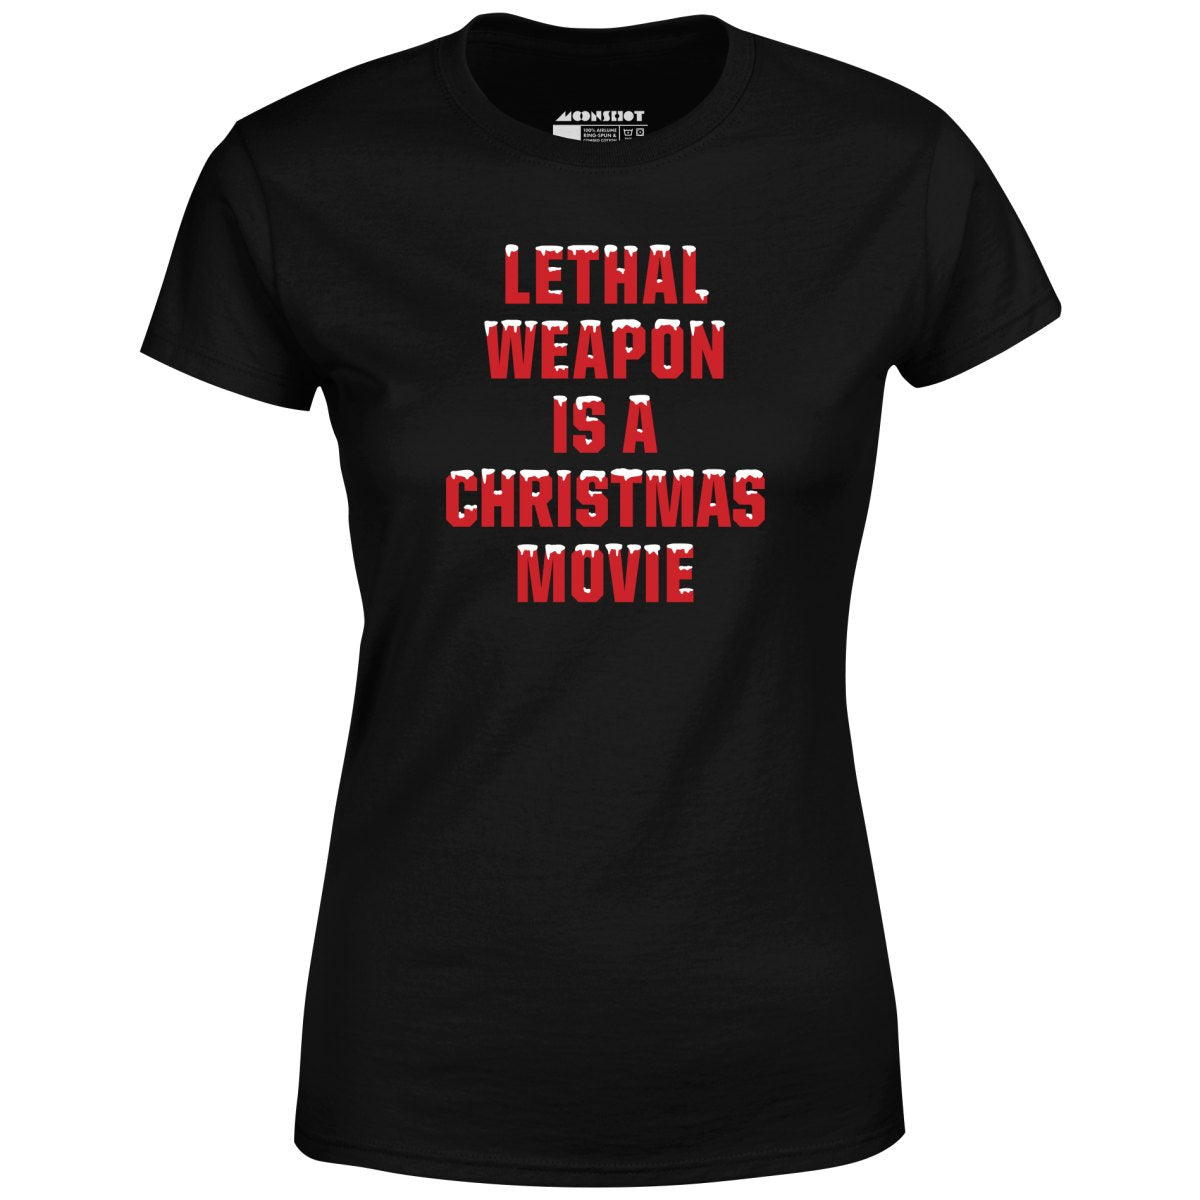 Lethal Weapon is a Christmas Movie - Women's T-Shirt